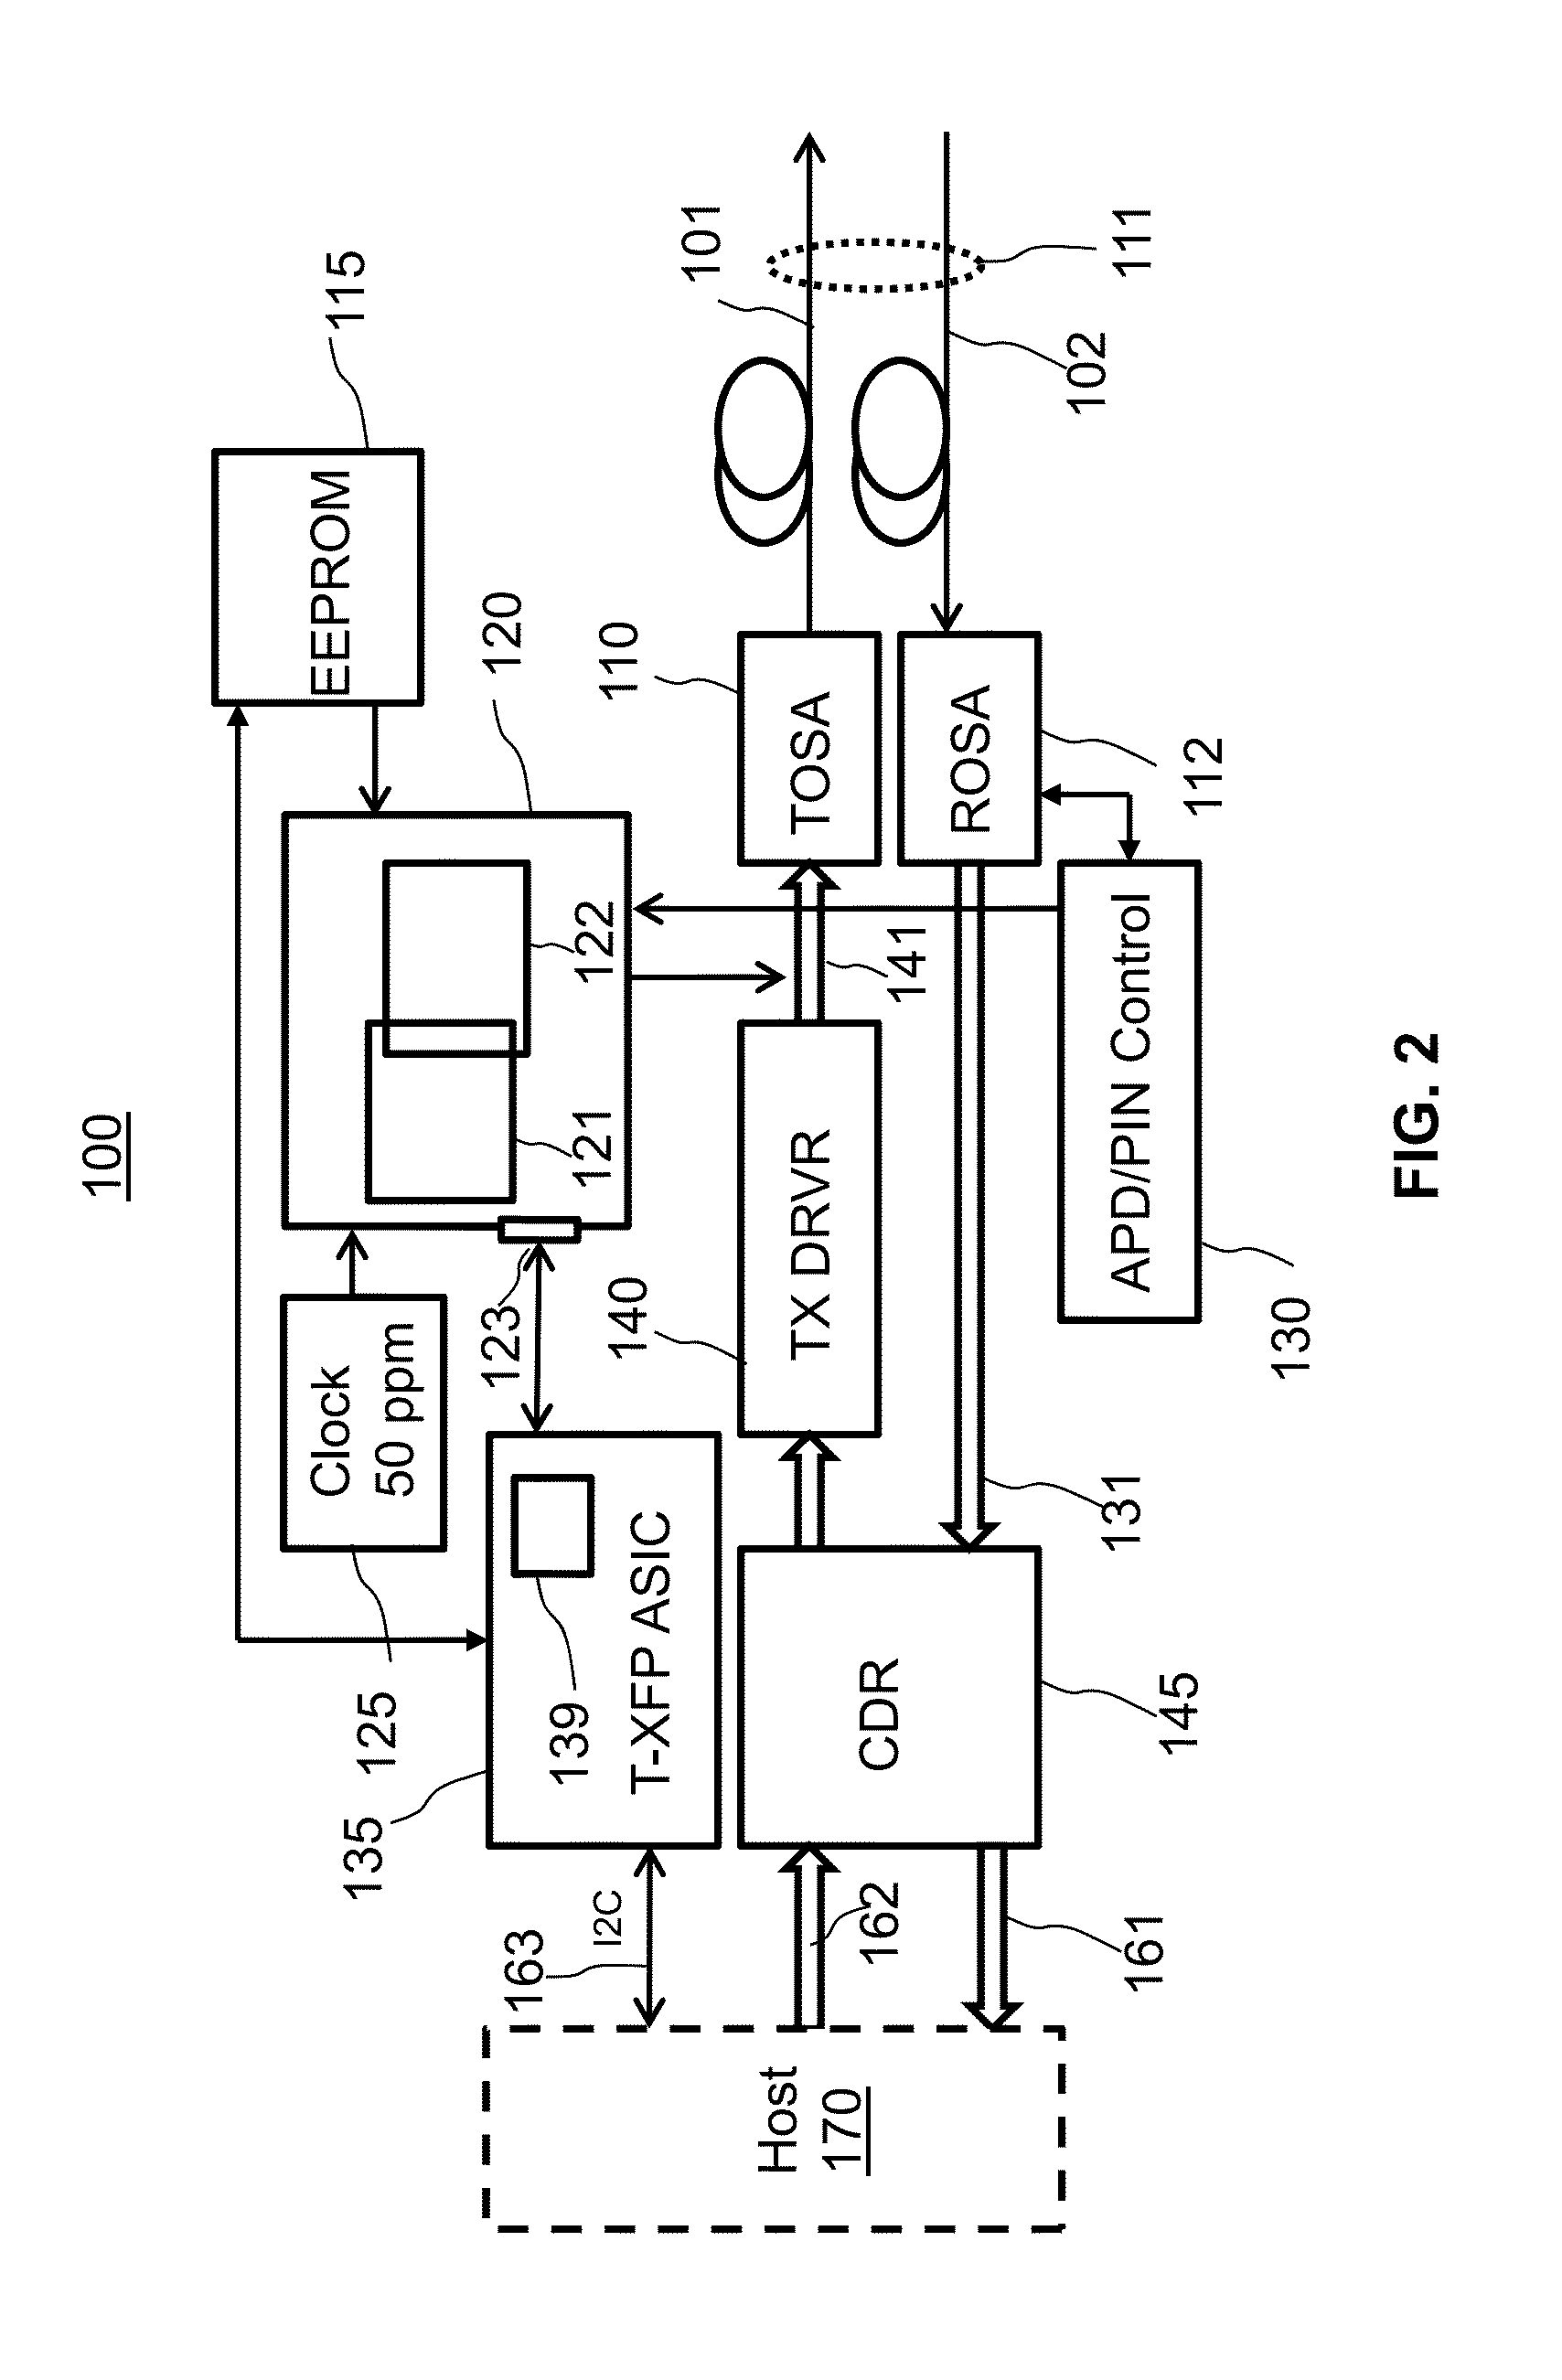 Communication between transceivers using in-band subcarrier tones